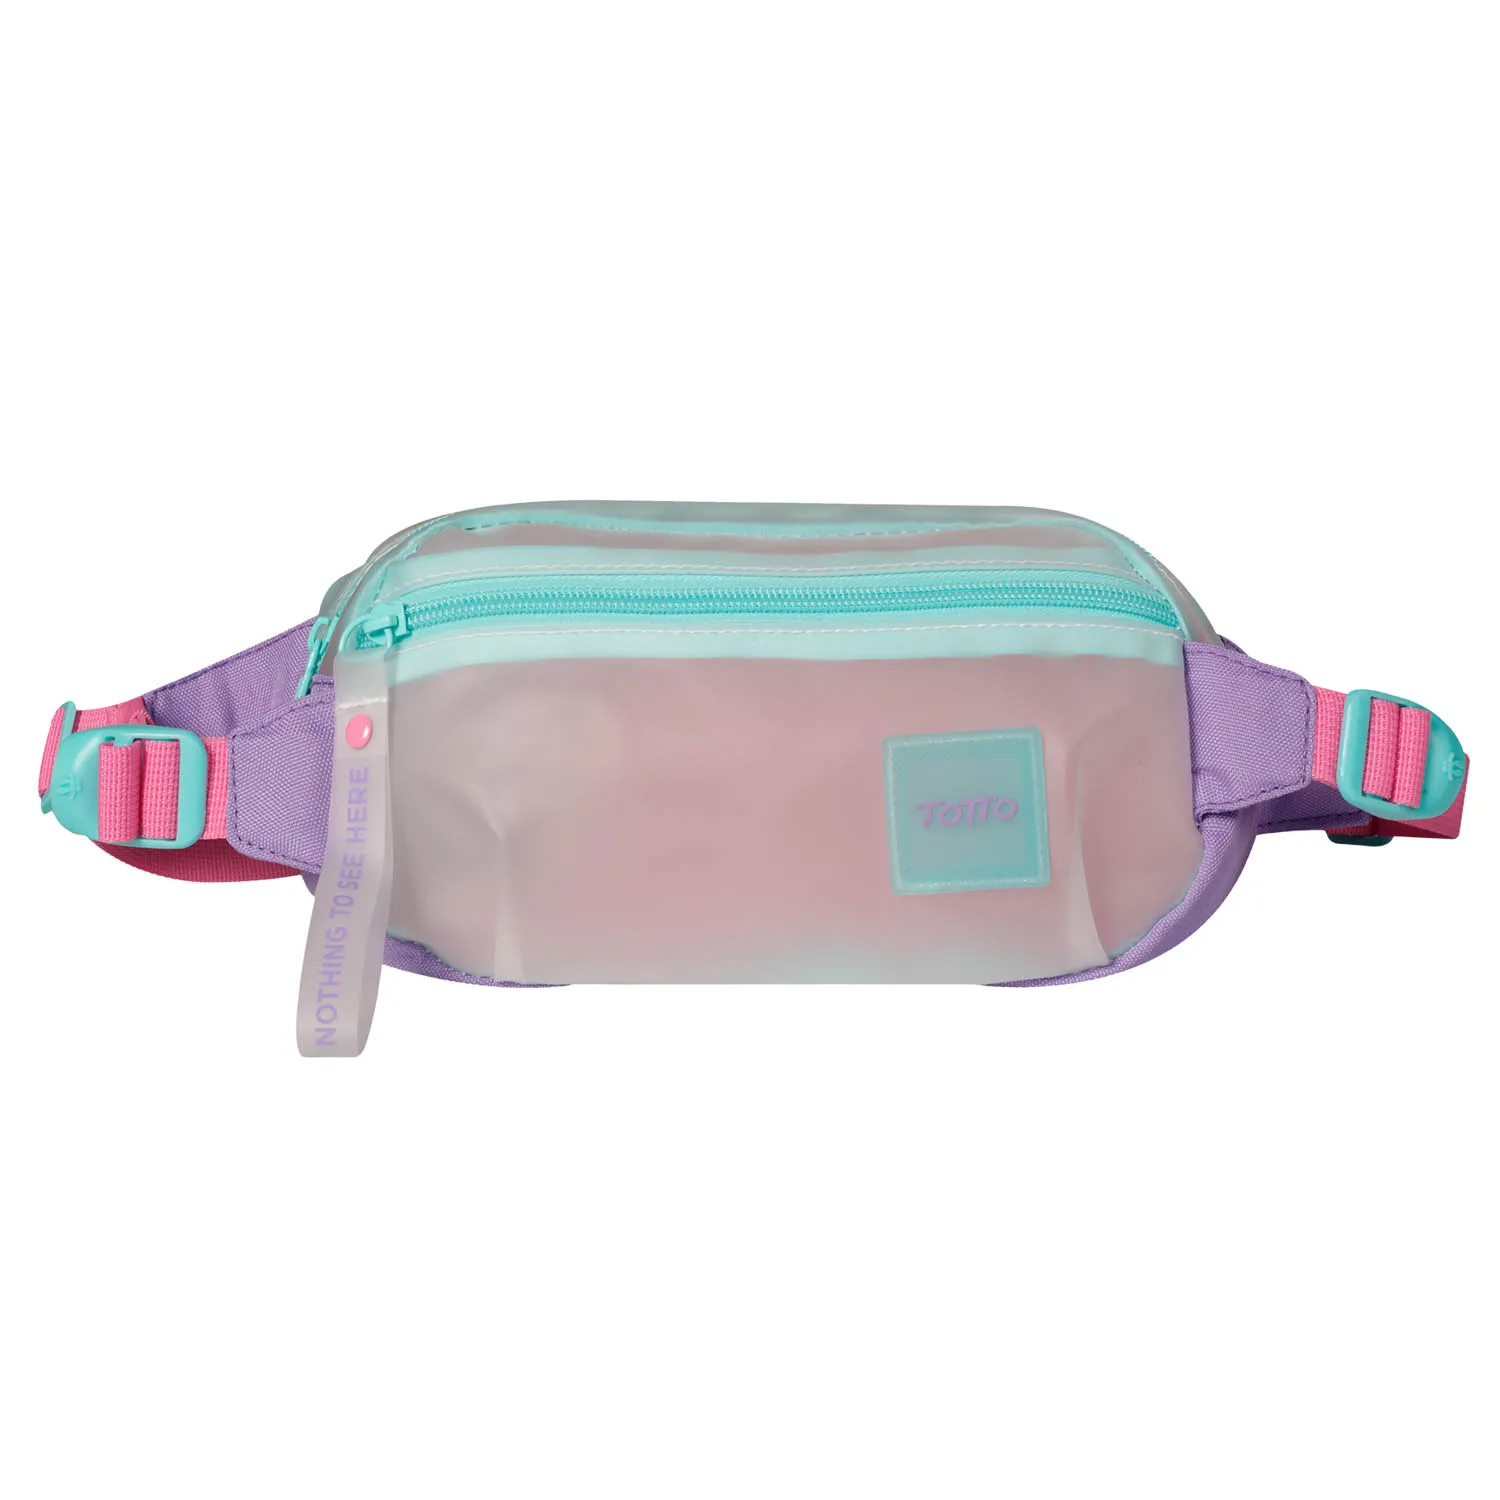 Youth fanny pack-Eimy purple - AliExpress